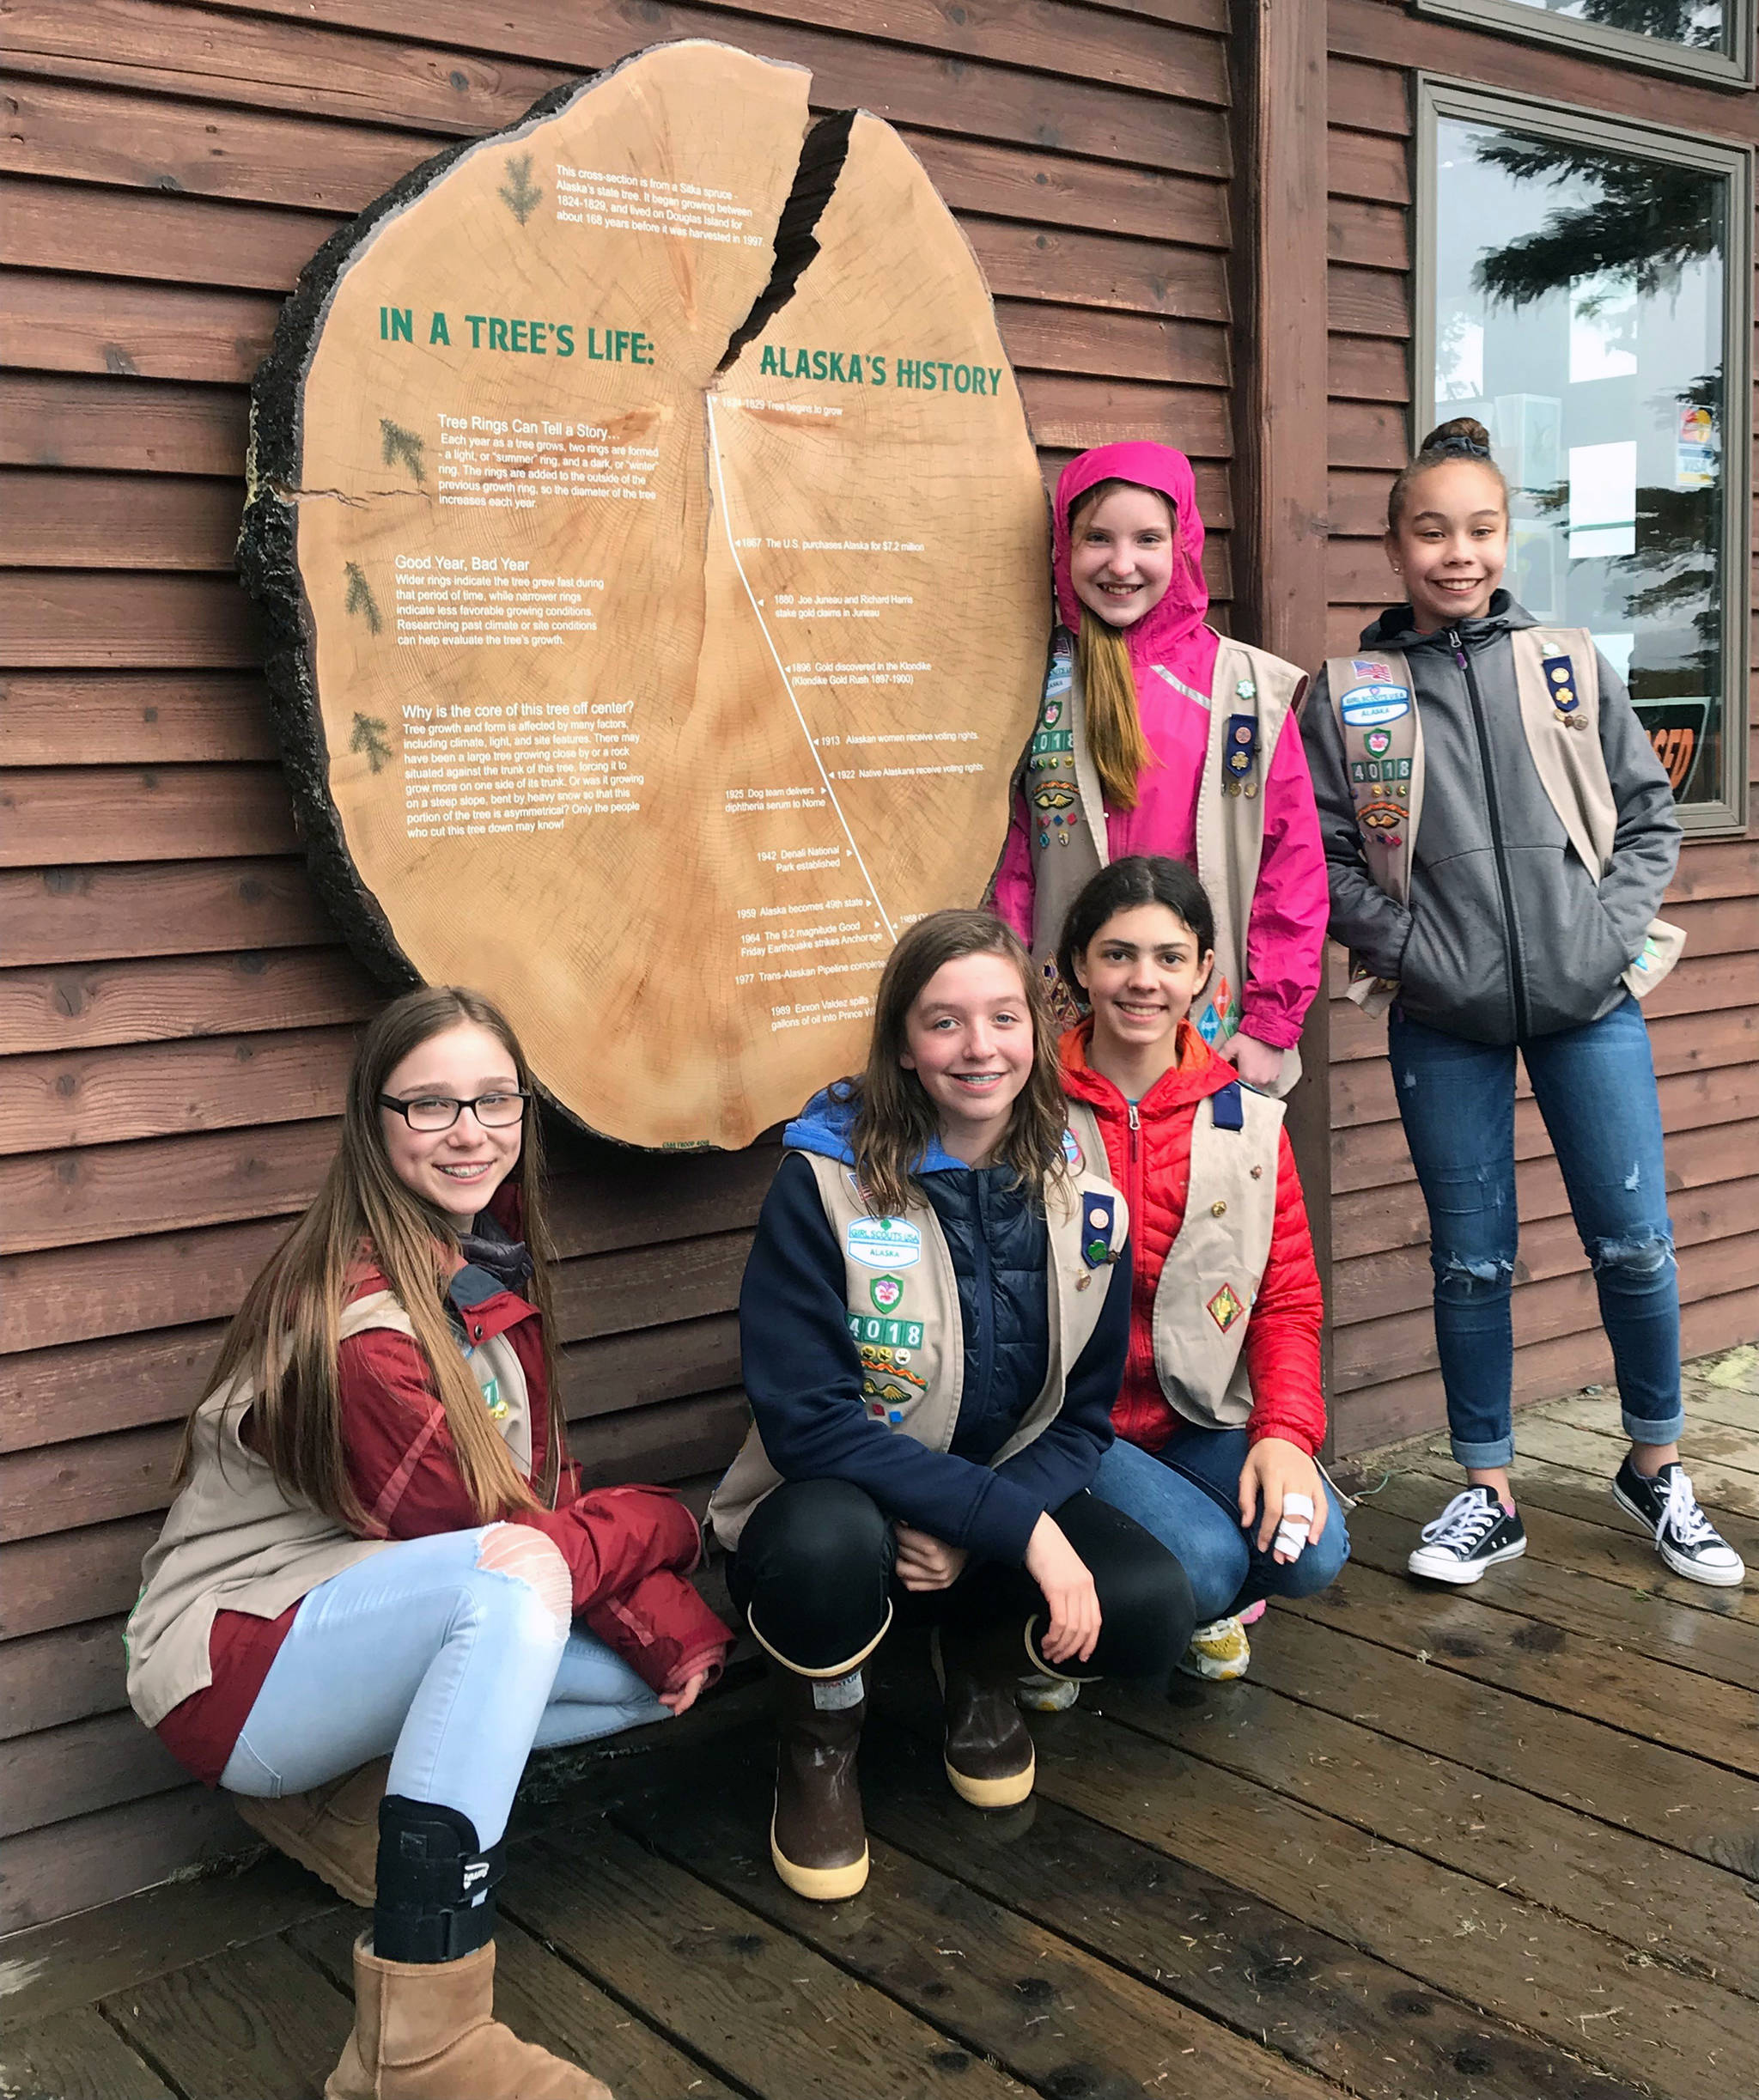 Girl Scout troop 4018 members Jayden Rosenbruch, Lauren Stichert, Anita Morrison, Sophia Owen and Sophia Ludeman pose with their display just after it was installed at The Nature Center last April. (Courtesy photo)